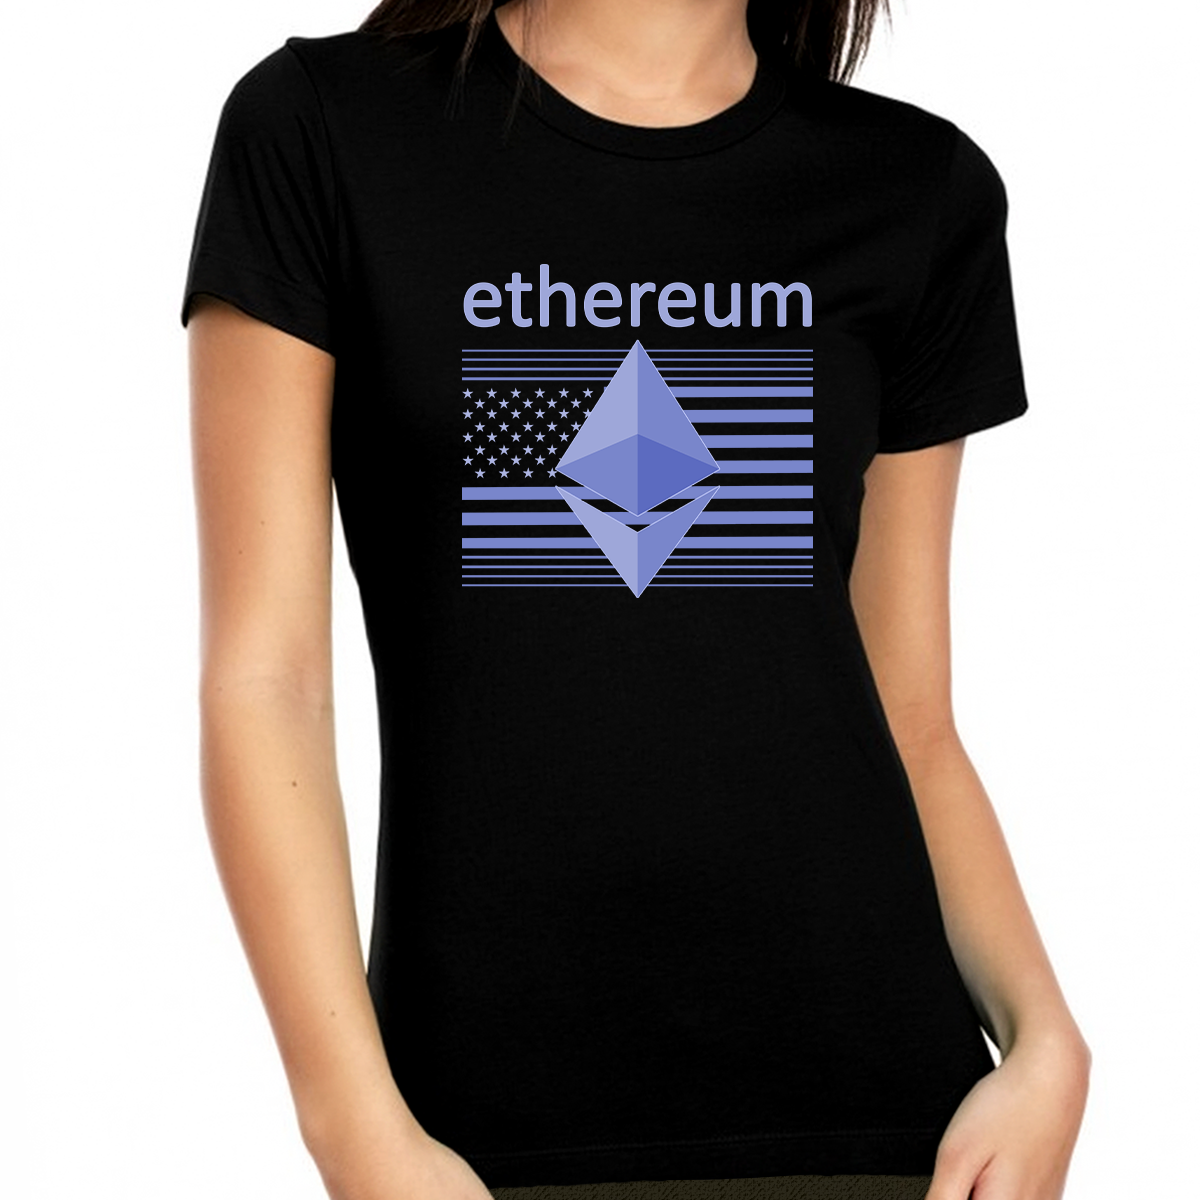 Crypto Shirts for Women Crypto Gifts Ethereum Shirt Crypto Shirt ETH Crypto Shirts for Women Crypto Shirt